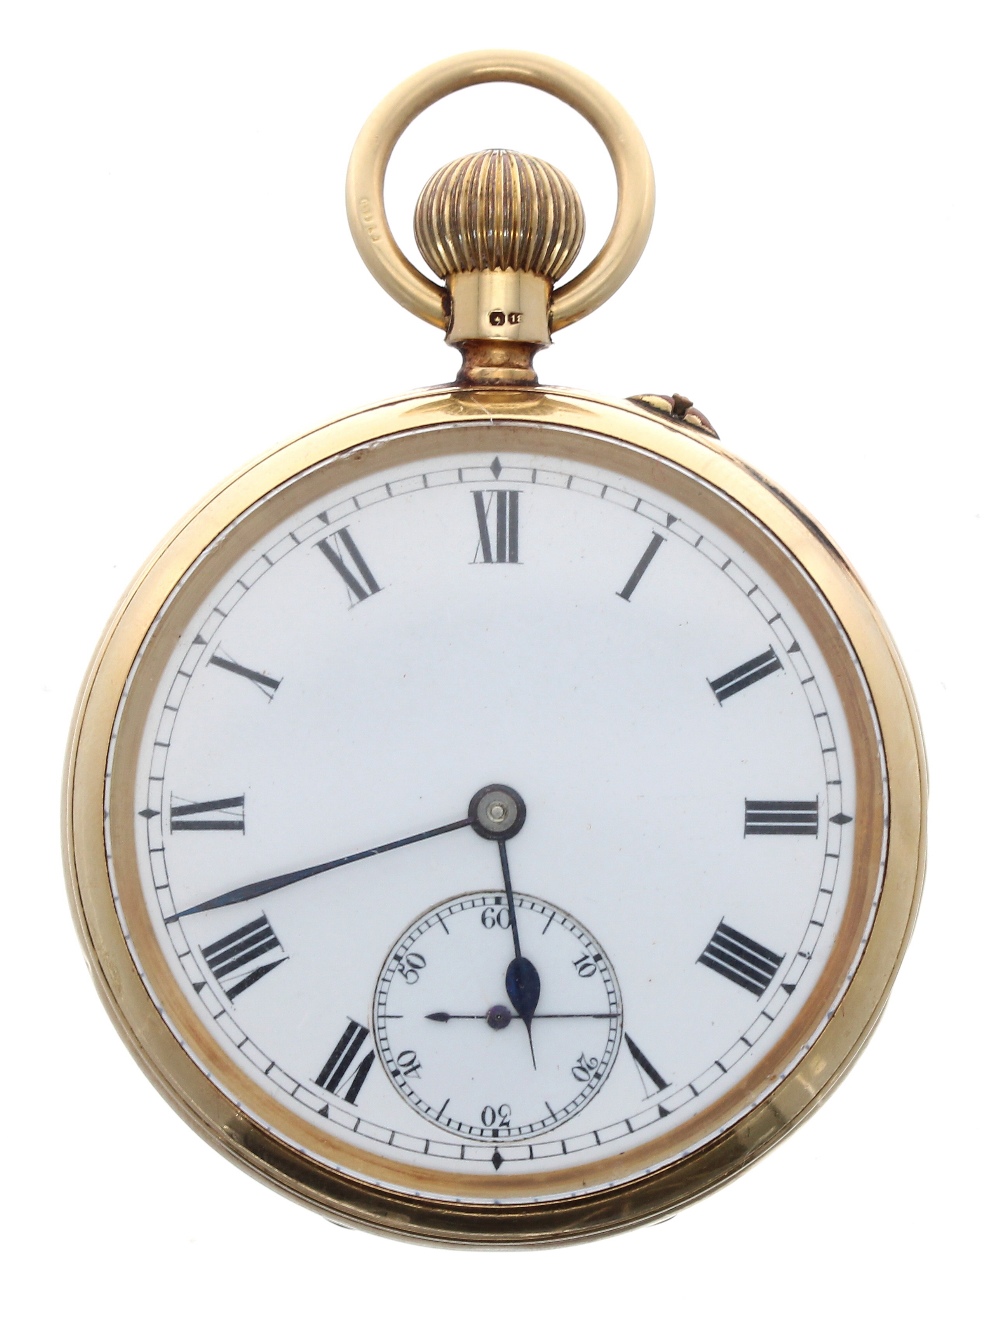 Goldsmiths & Silversmiths Company 18ct lever pocket watch, London 1908, signed three quarter plate